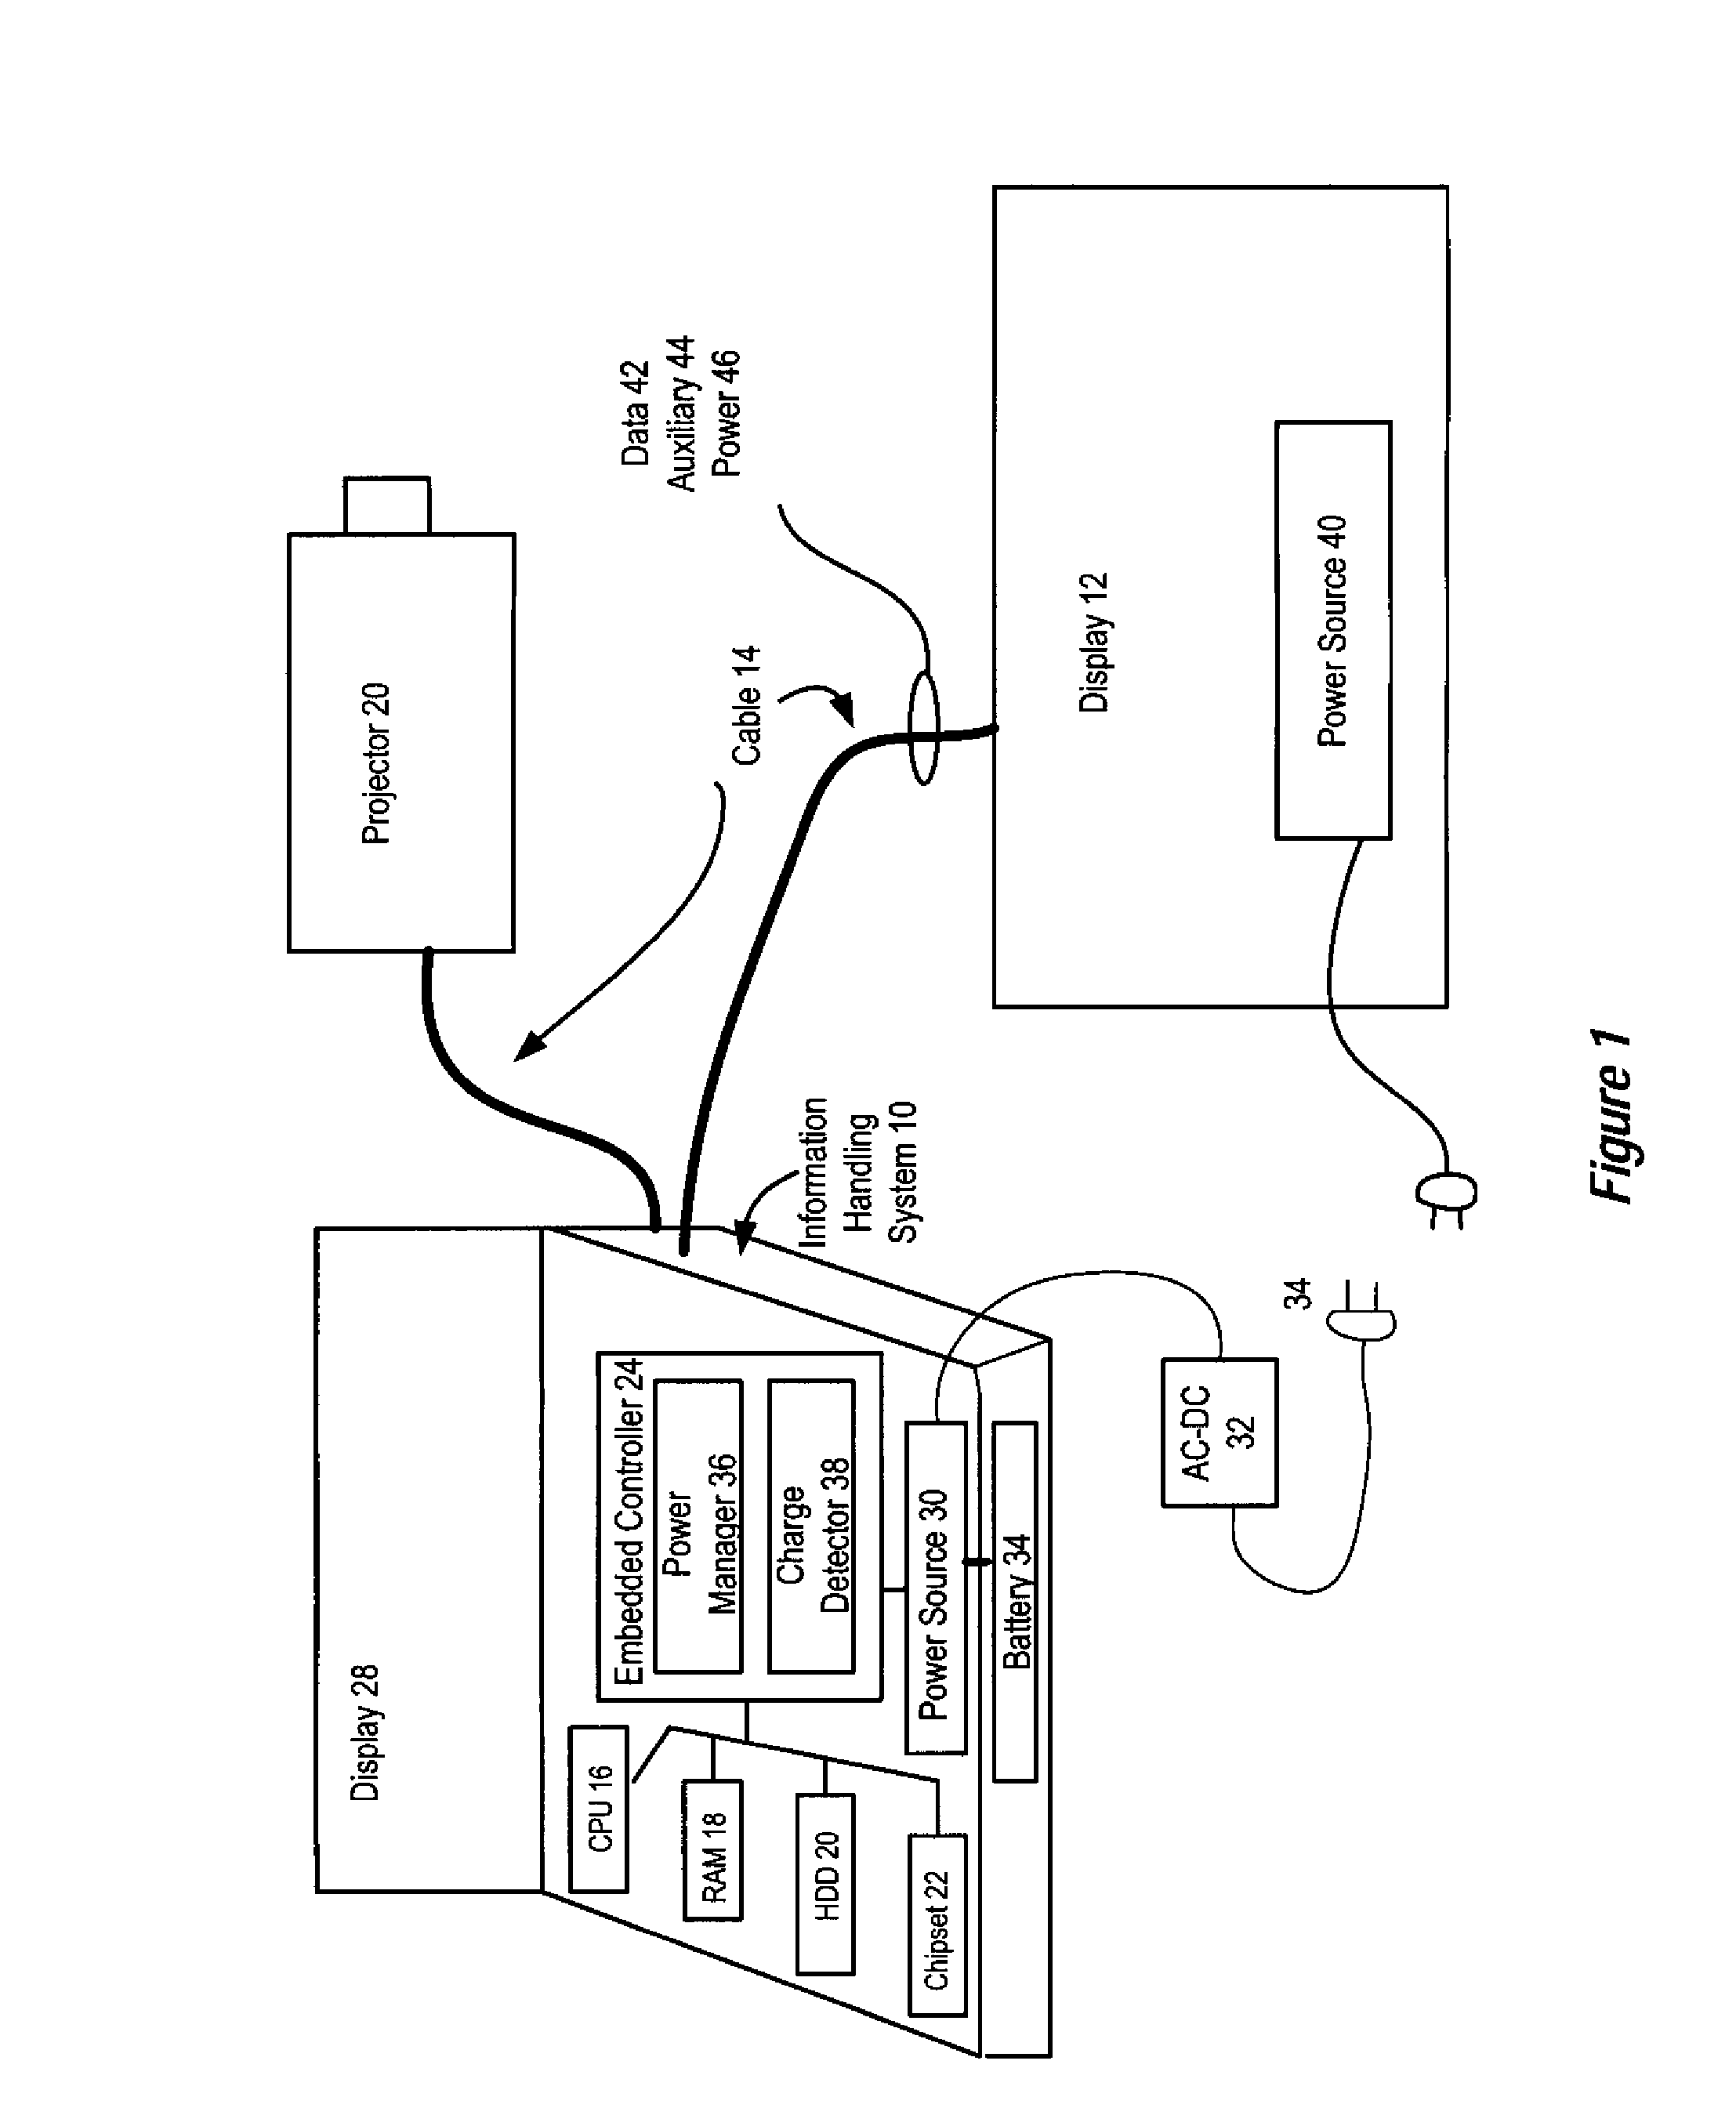 System and Method for Powering an Information Handling System Through a Display Cable